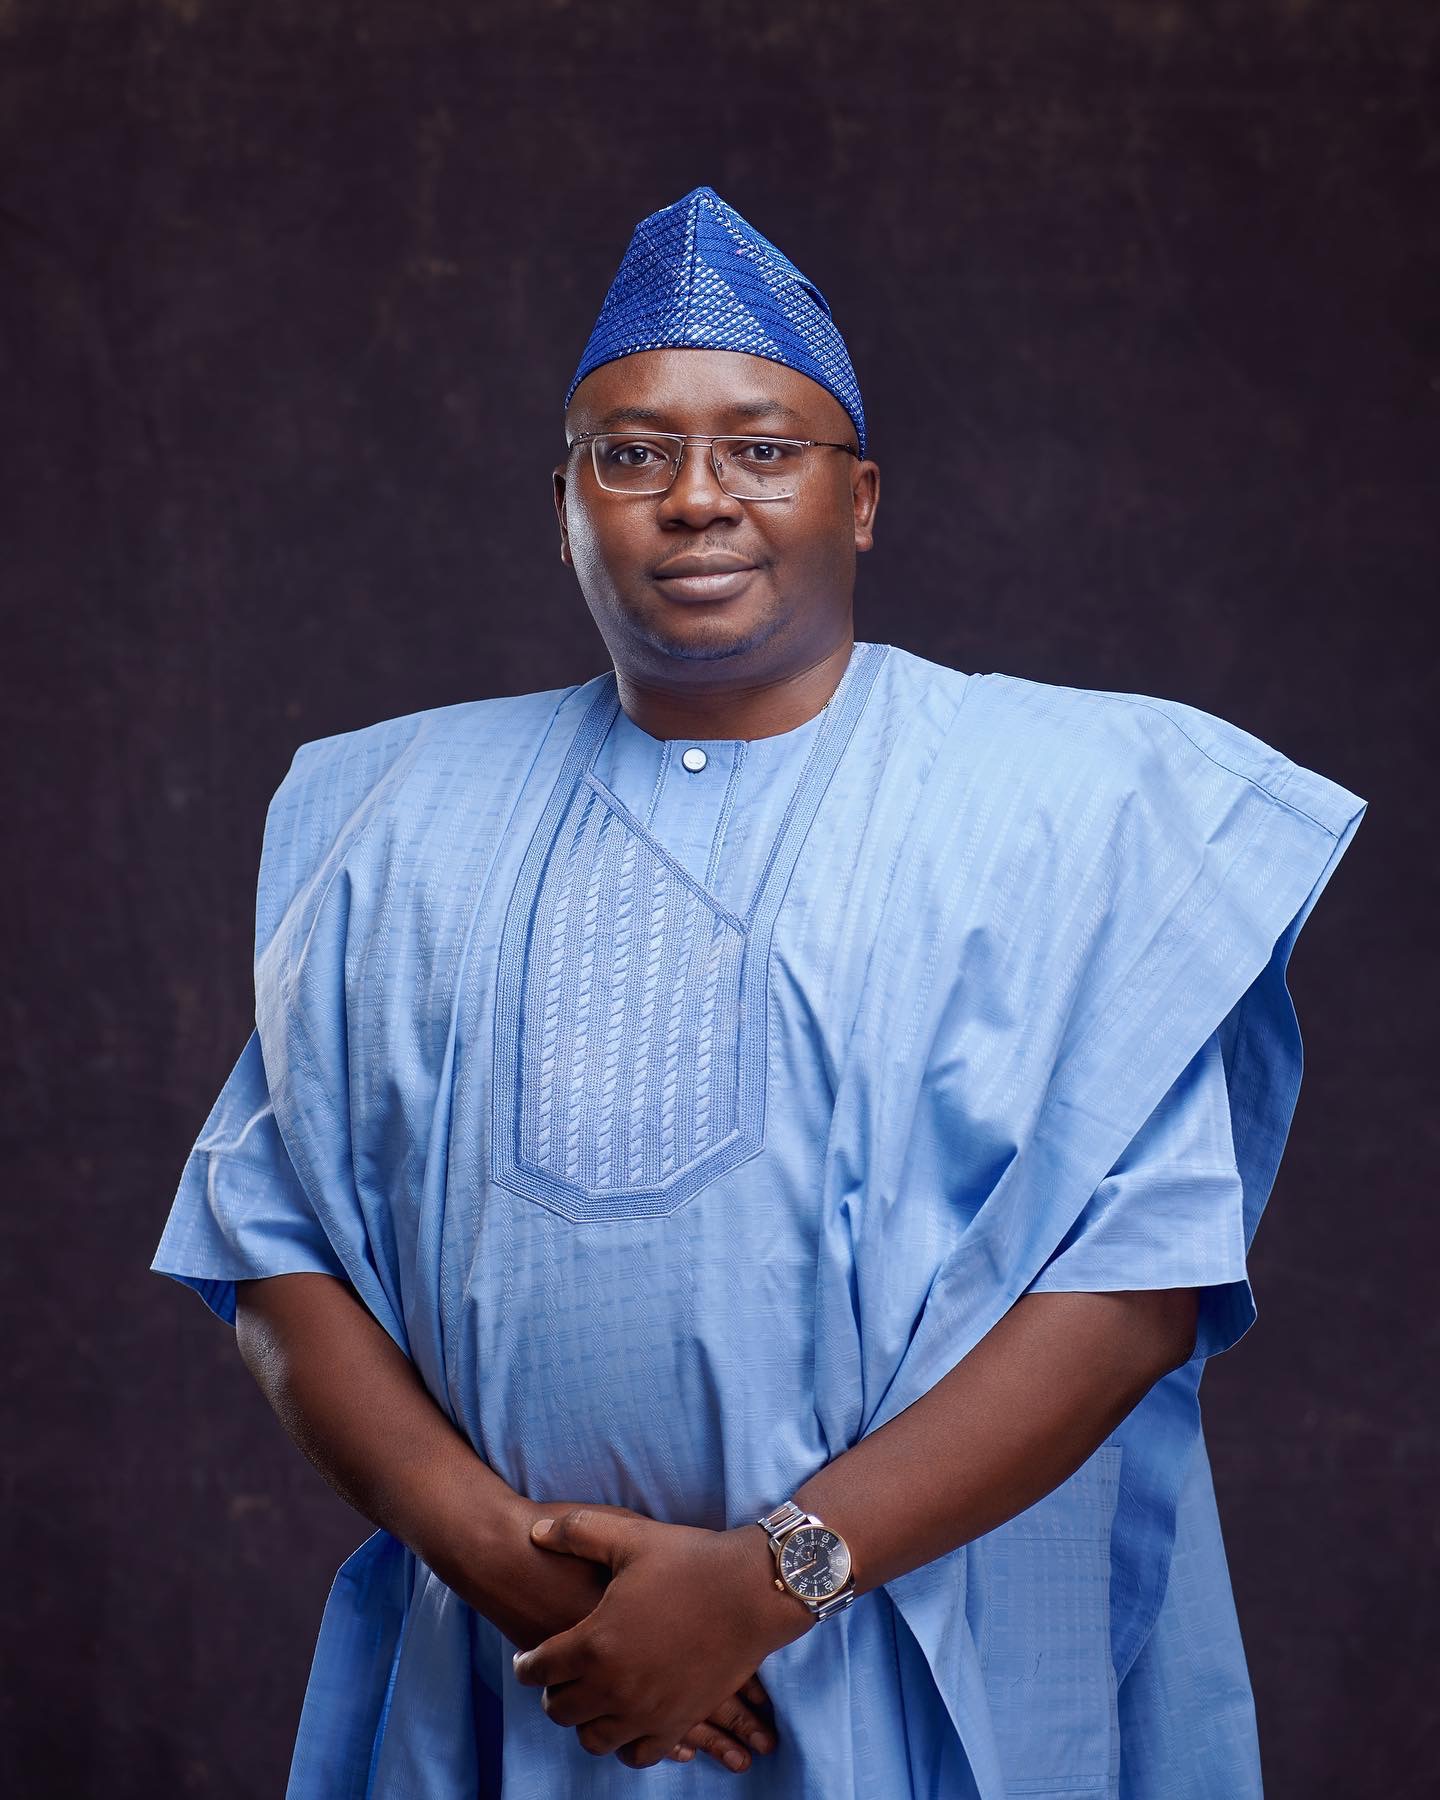 Adelabu Congratulates Sunday Dare, Says Ministerial Appointment Not A Compensation For Electoral Loss